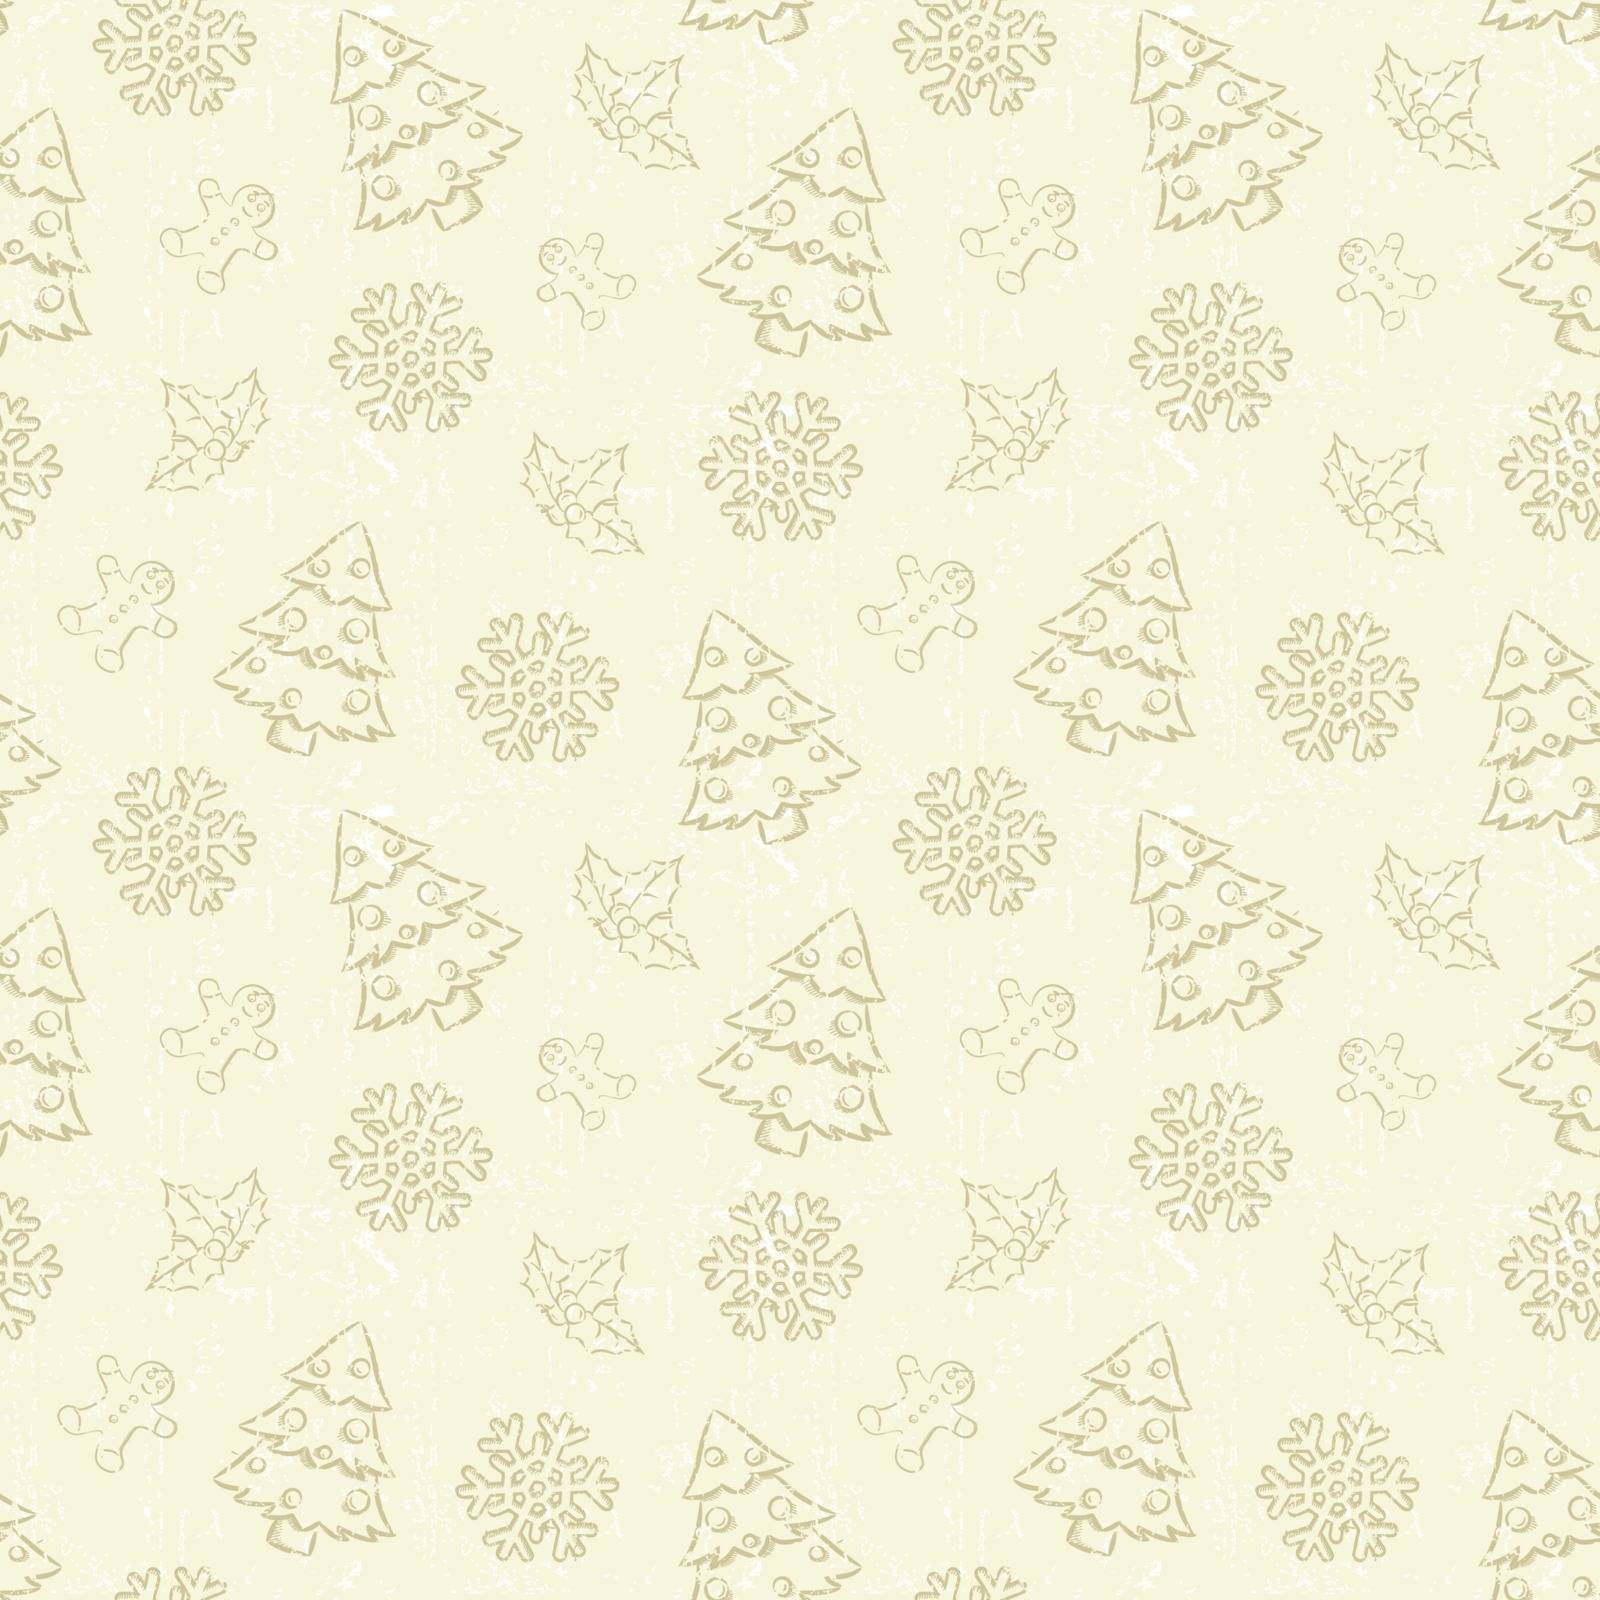 Christmas pattern by kartyl